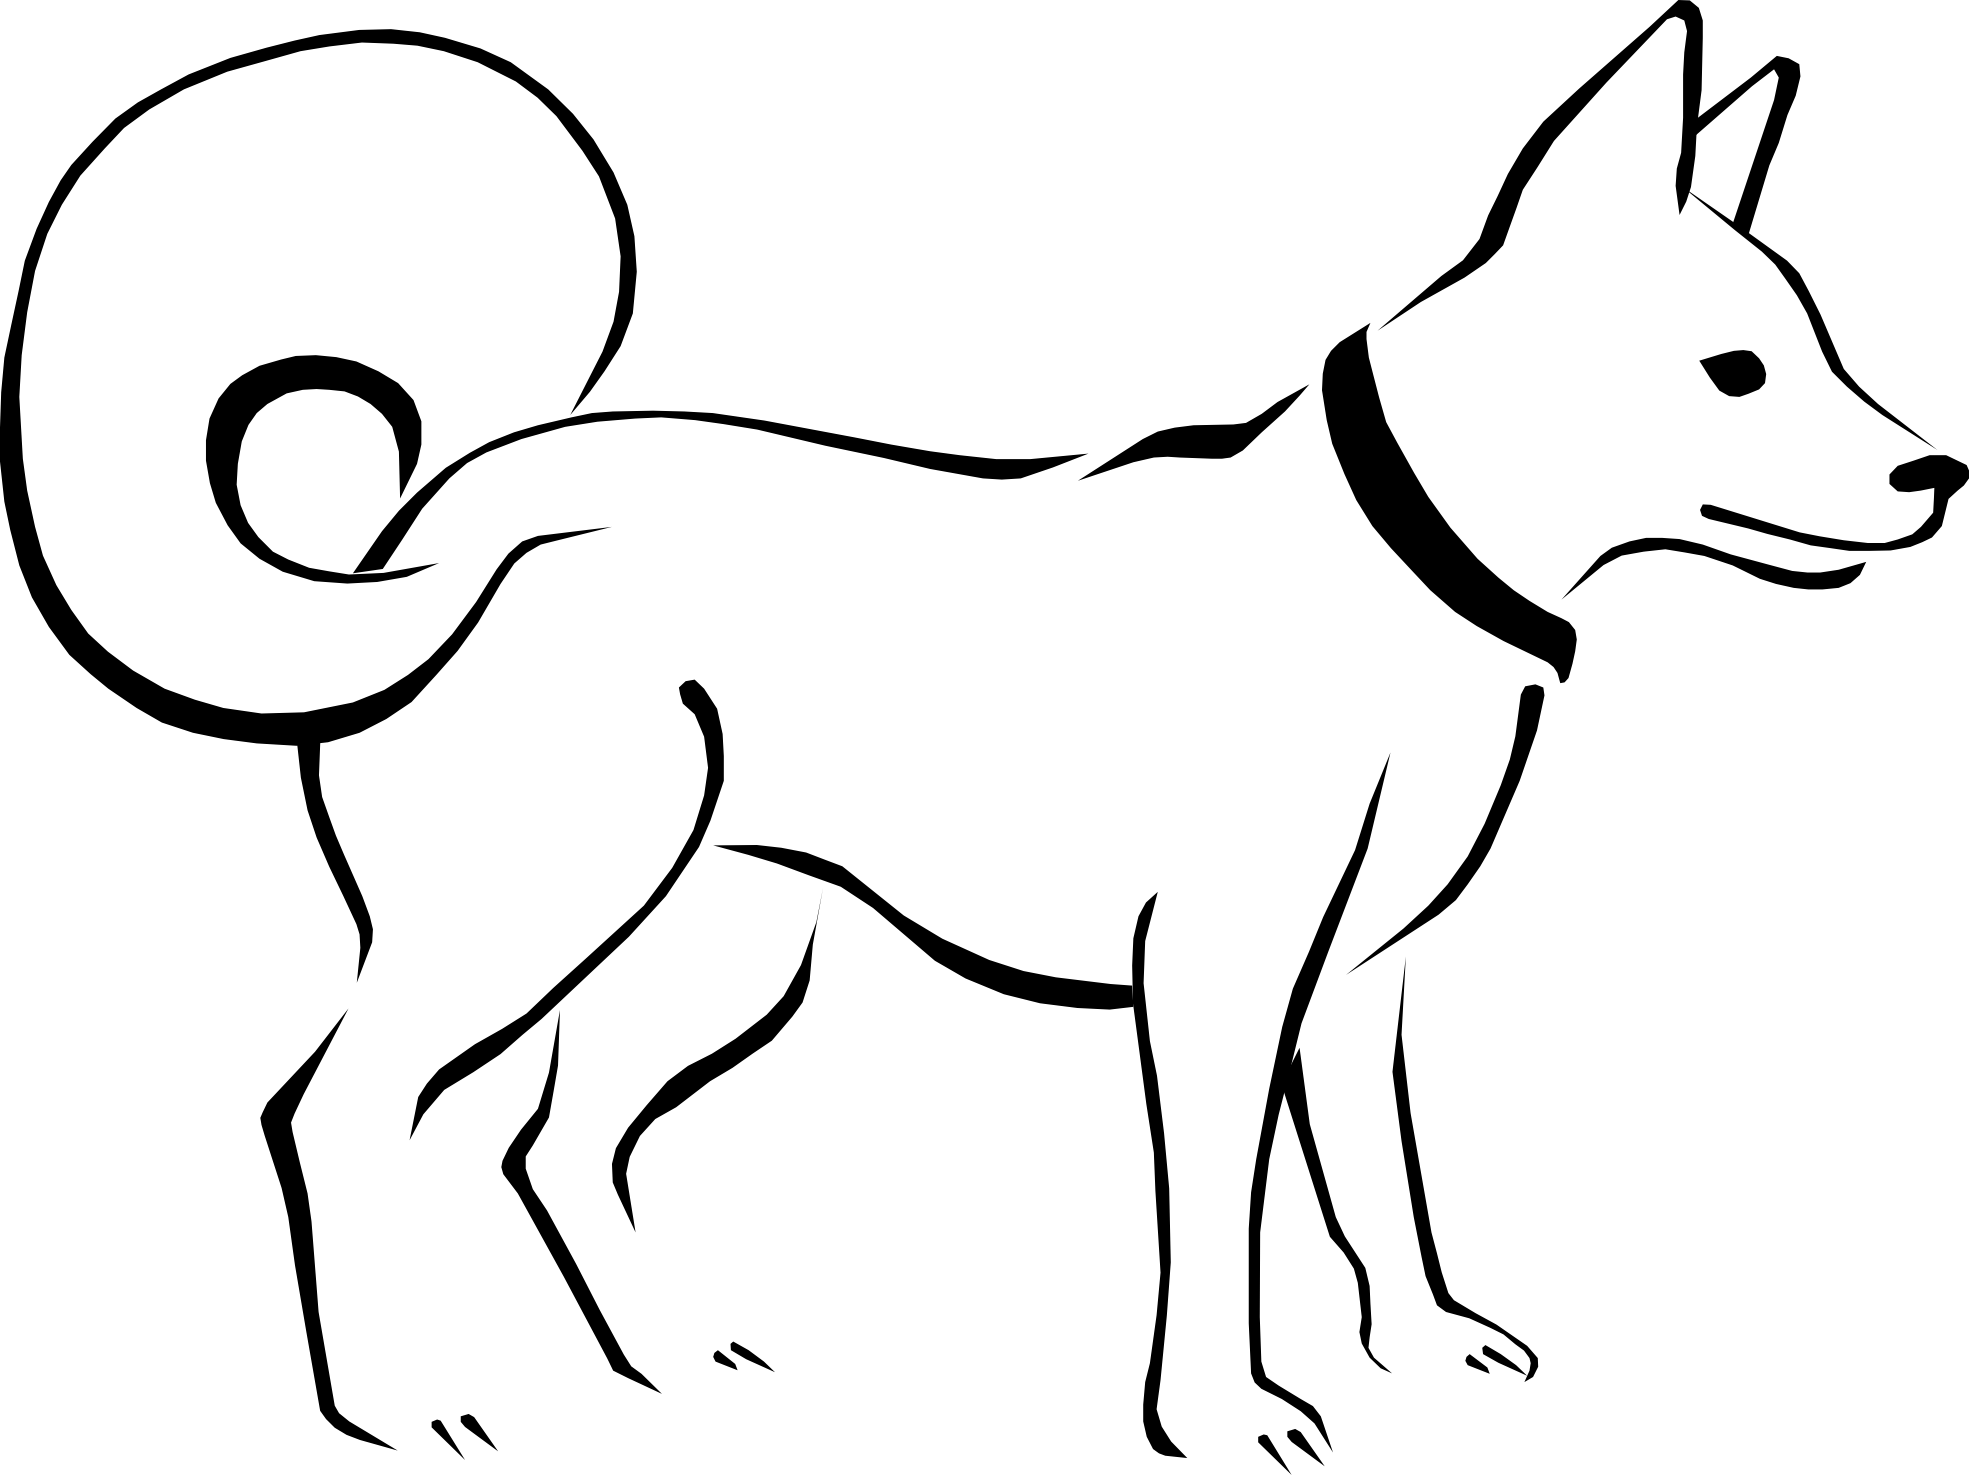 Dog clipart black and white jumping